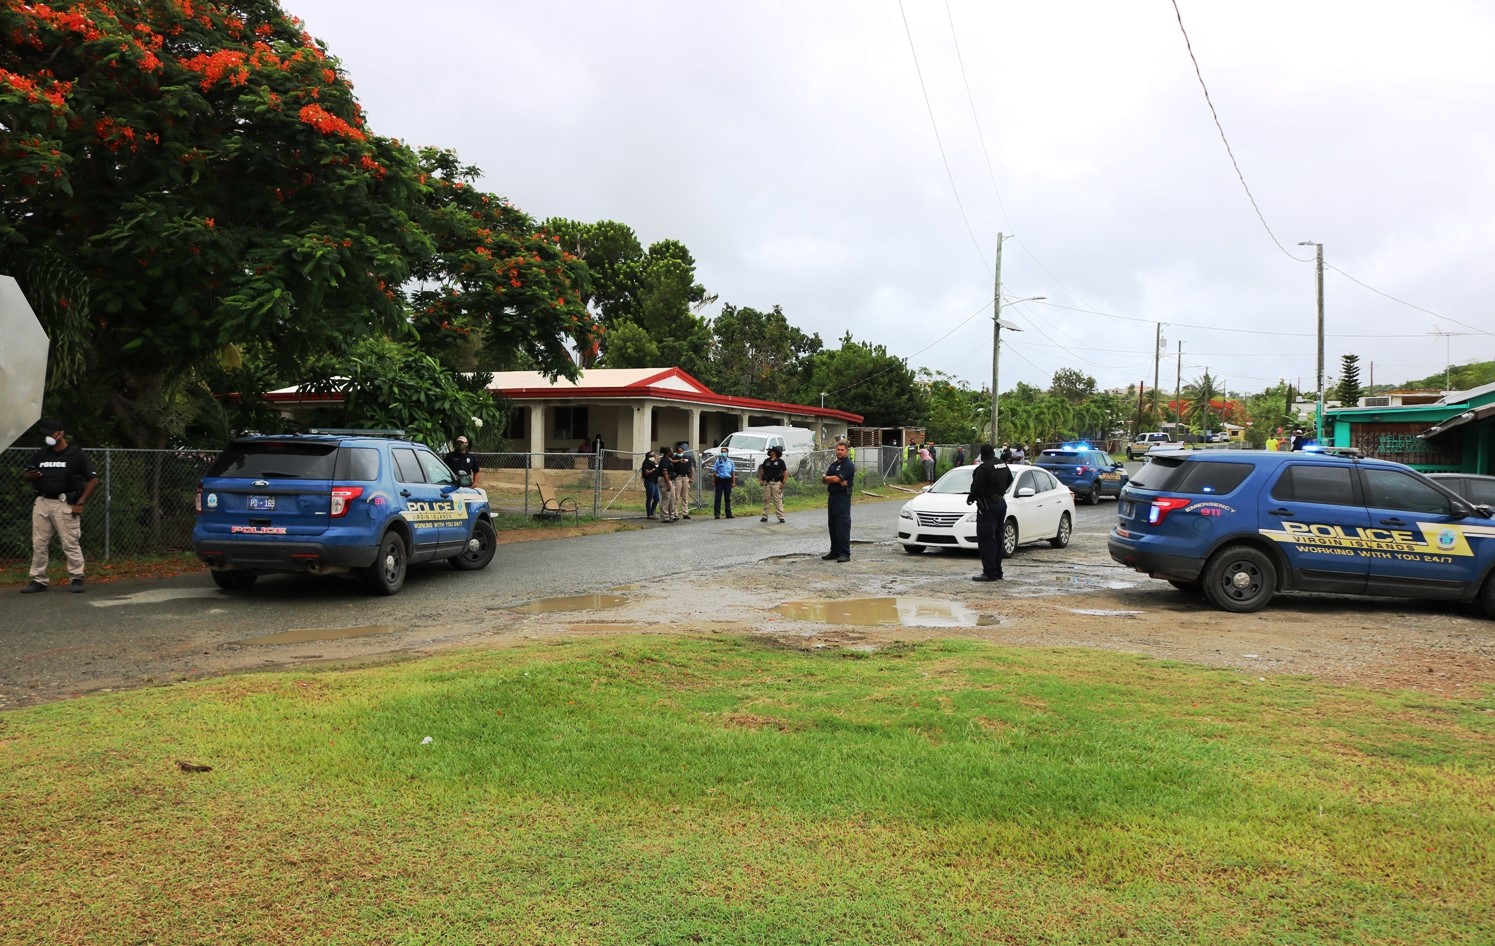 Castle Burke Man Shoots Shamal 'Indian' Riviere To Death At Convenience Store In Sion Farm Today: VIPD